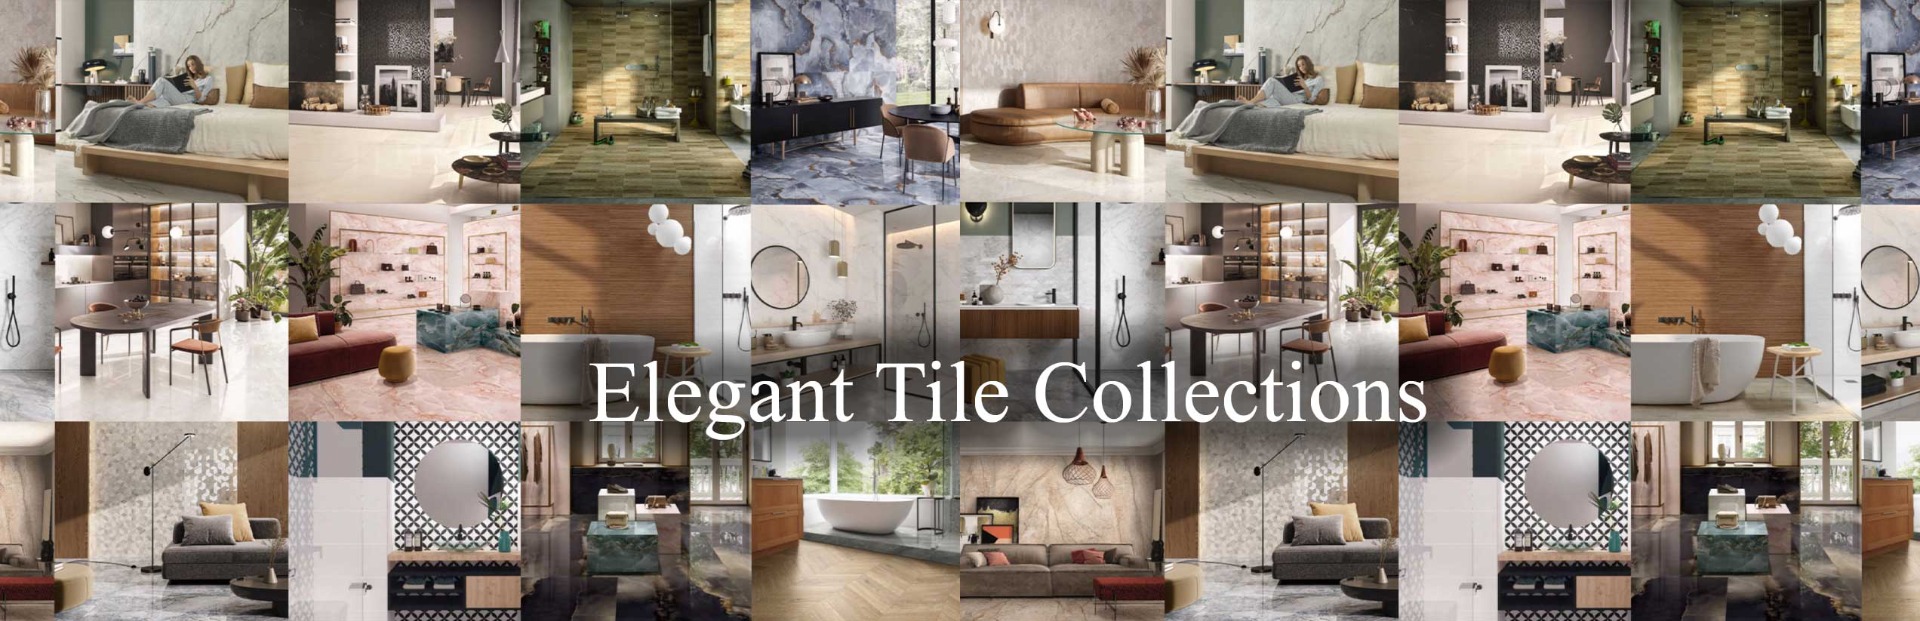 elegant tile collections